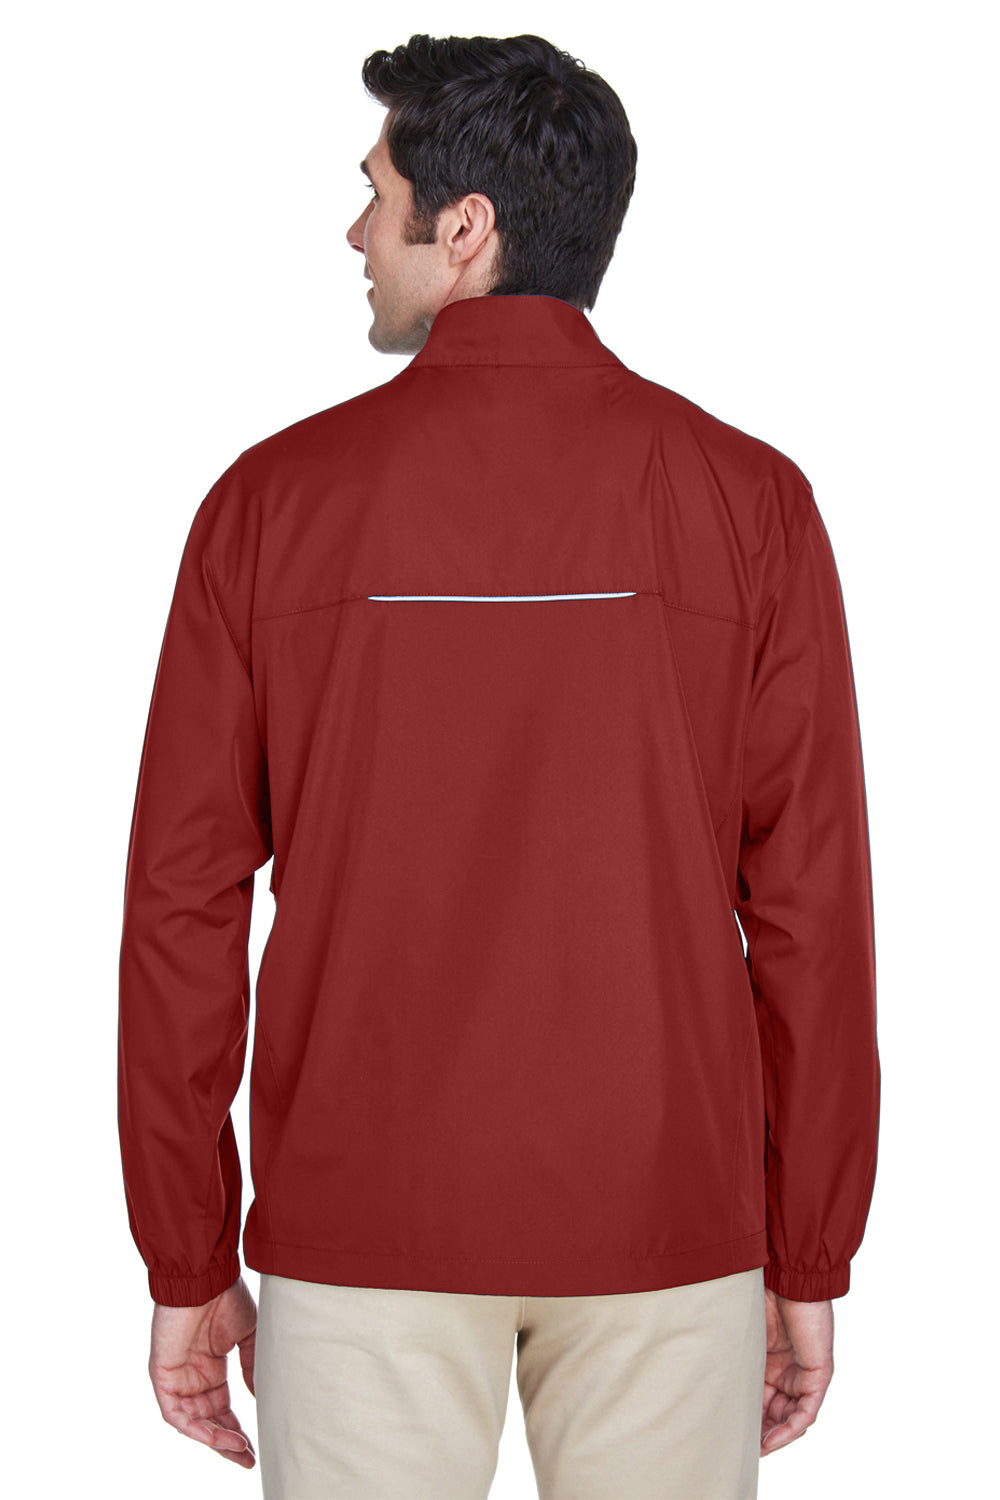 Core 365 88183 Mens Motivate Water Resistant Full Zip Jacket Red Back